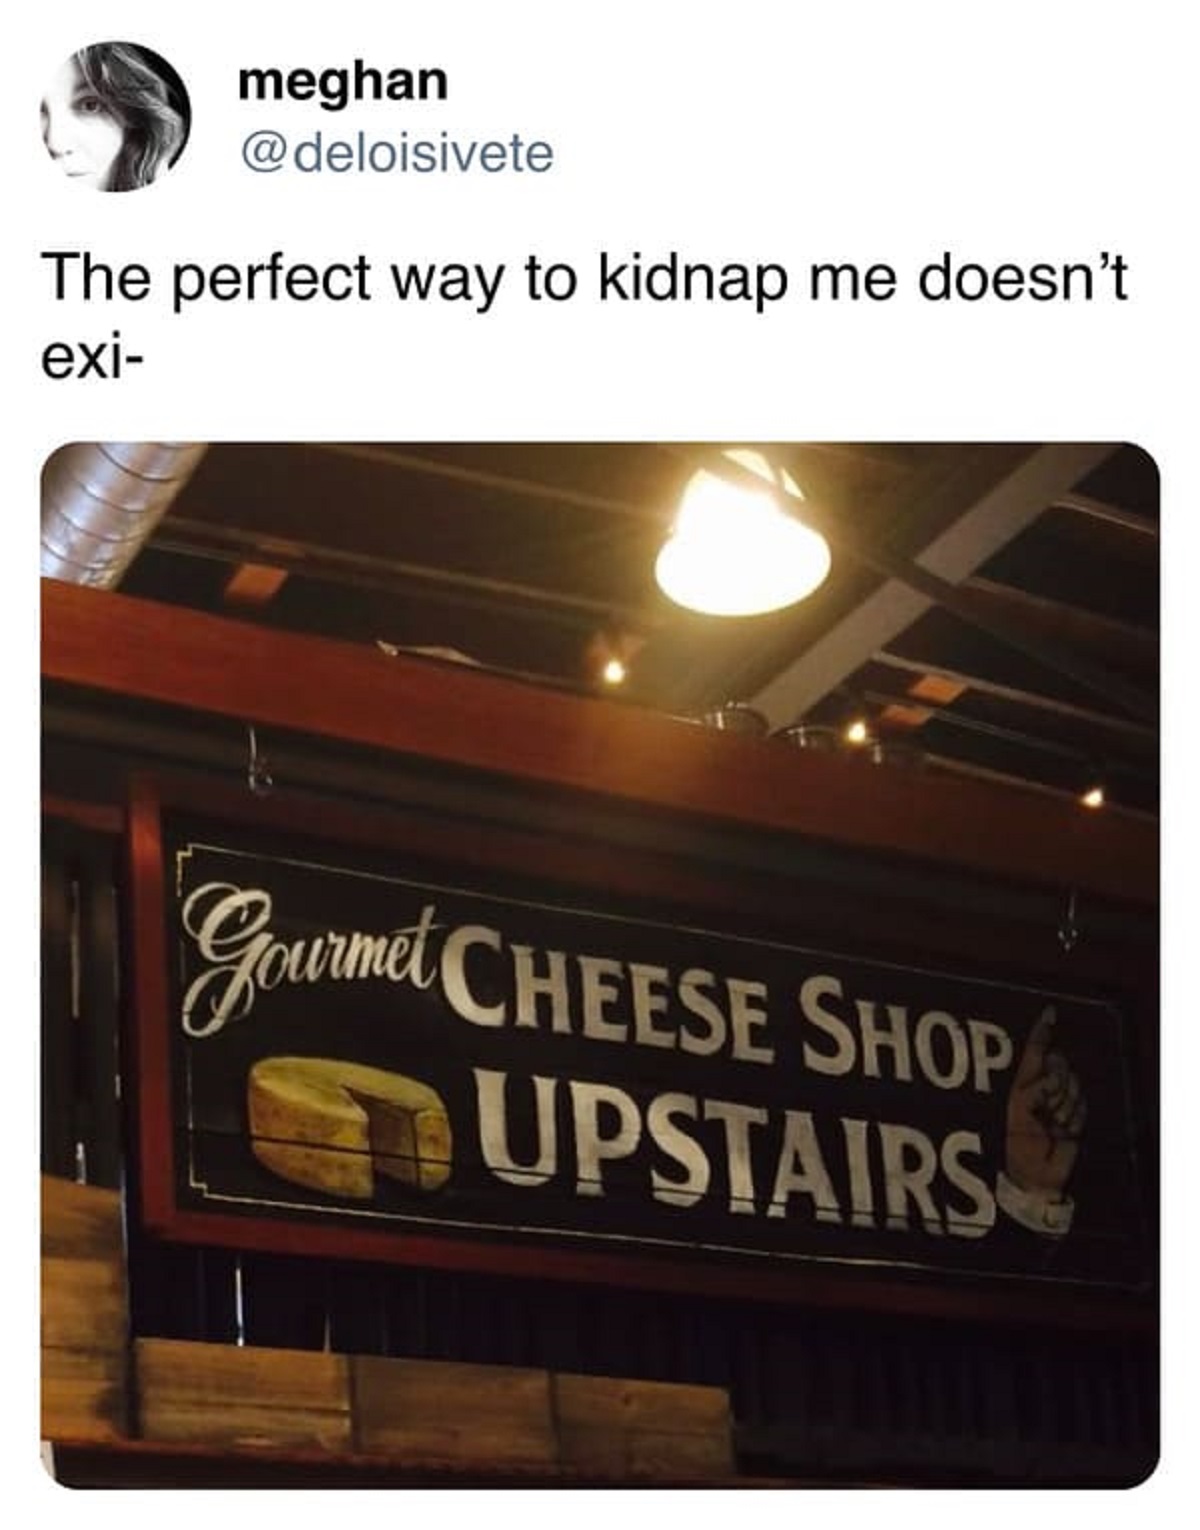 signage - meghan The perfect way to kidnap me doesn't exi Gourmet Cheese Shop Upstairs